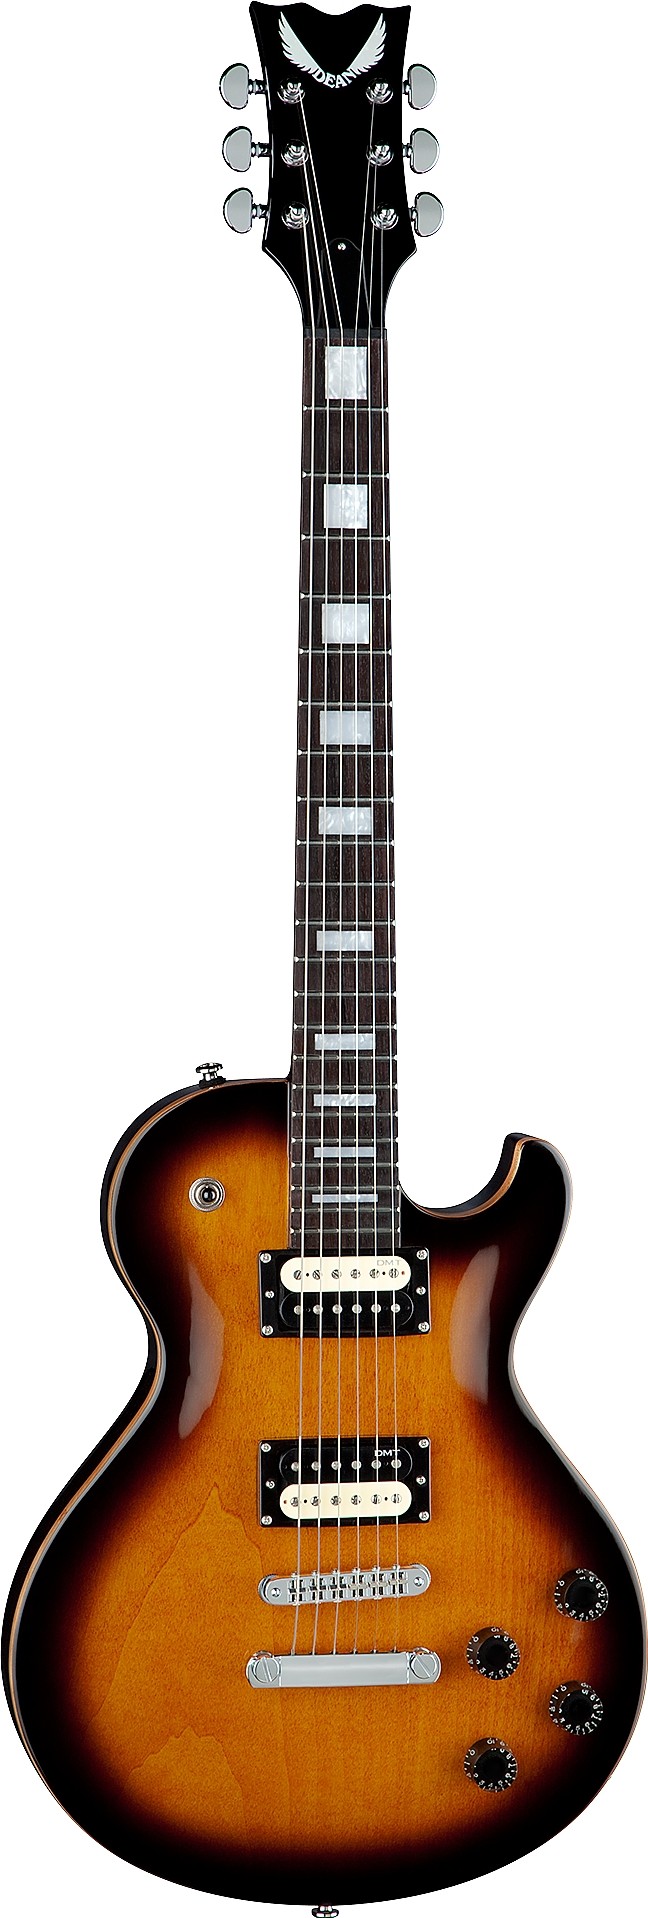 Thoroughbred Maple Top (2013) by Dean